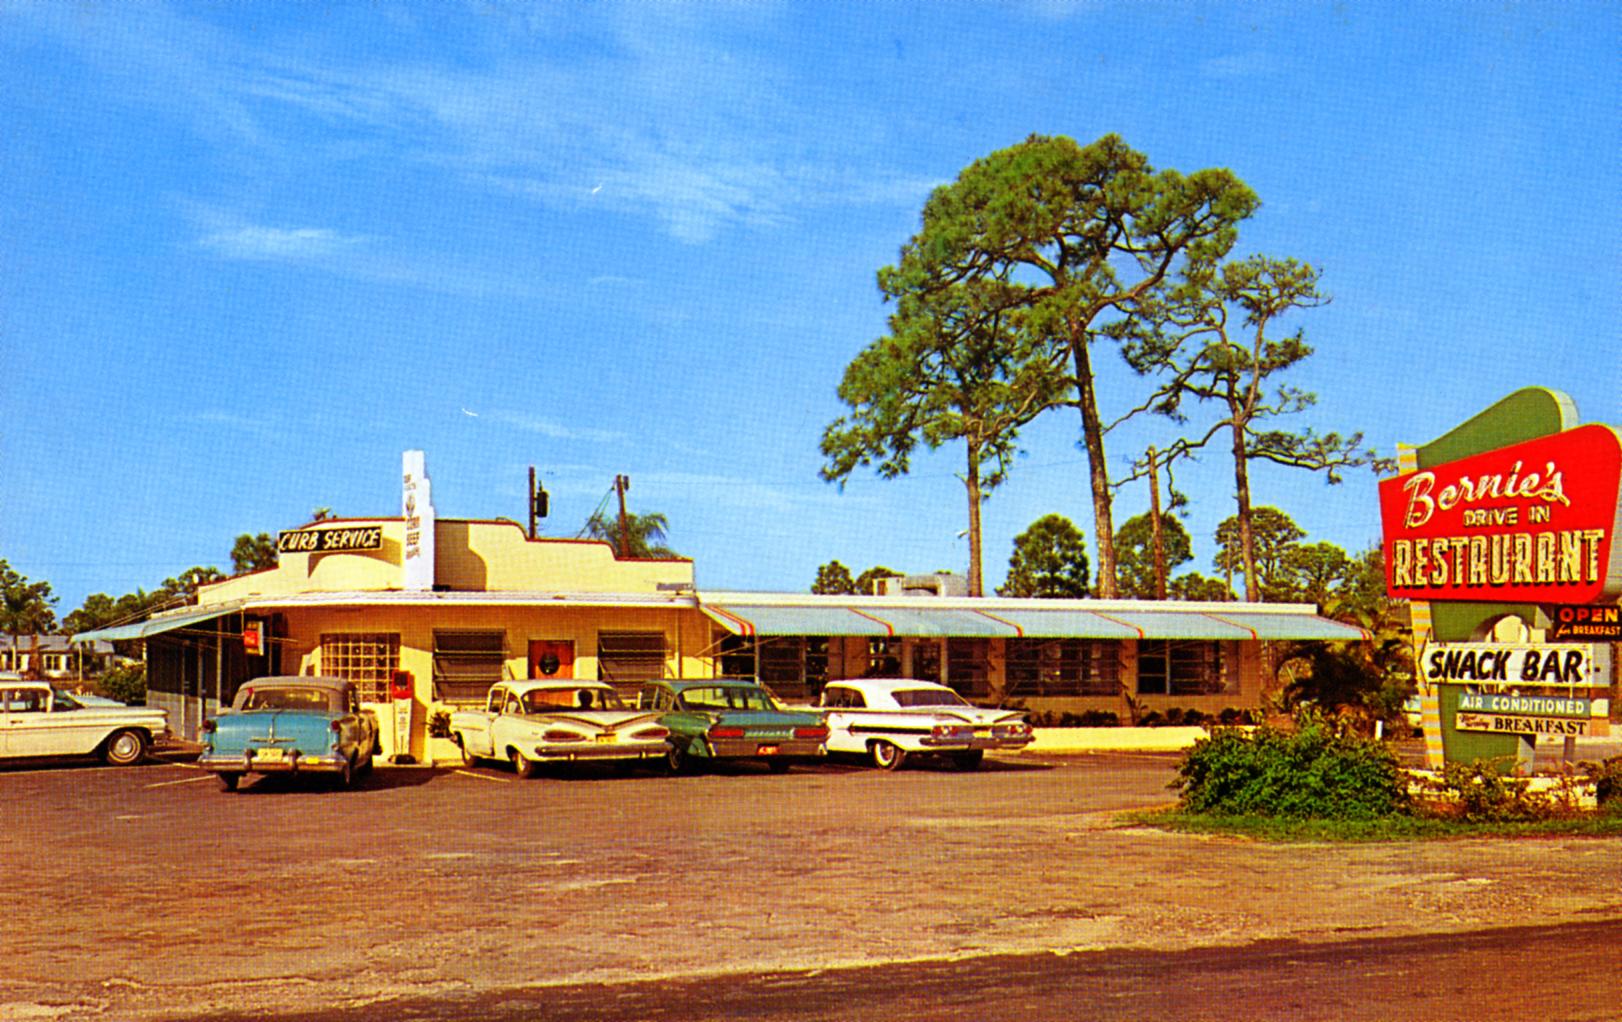 Bernie's Drive In Restaurant - 3452 South Cleveland Avenue, Fort Myers, Florida U.S.A. - early 1960s